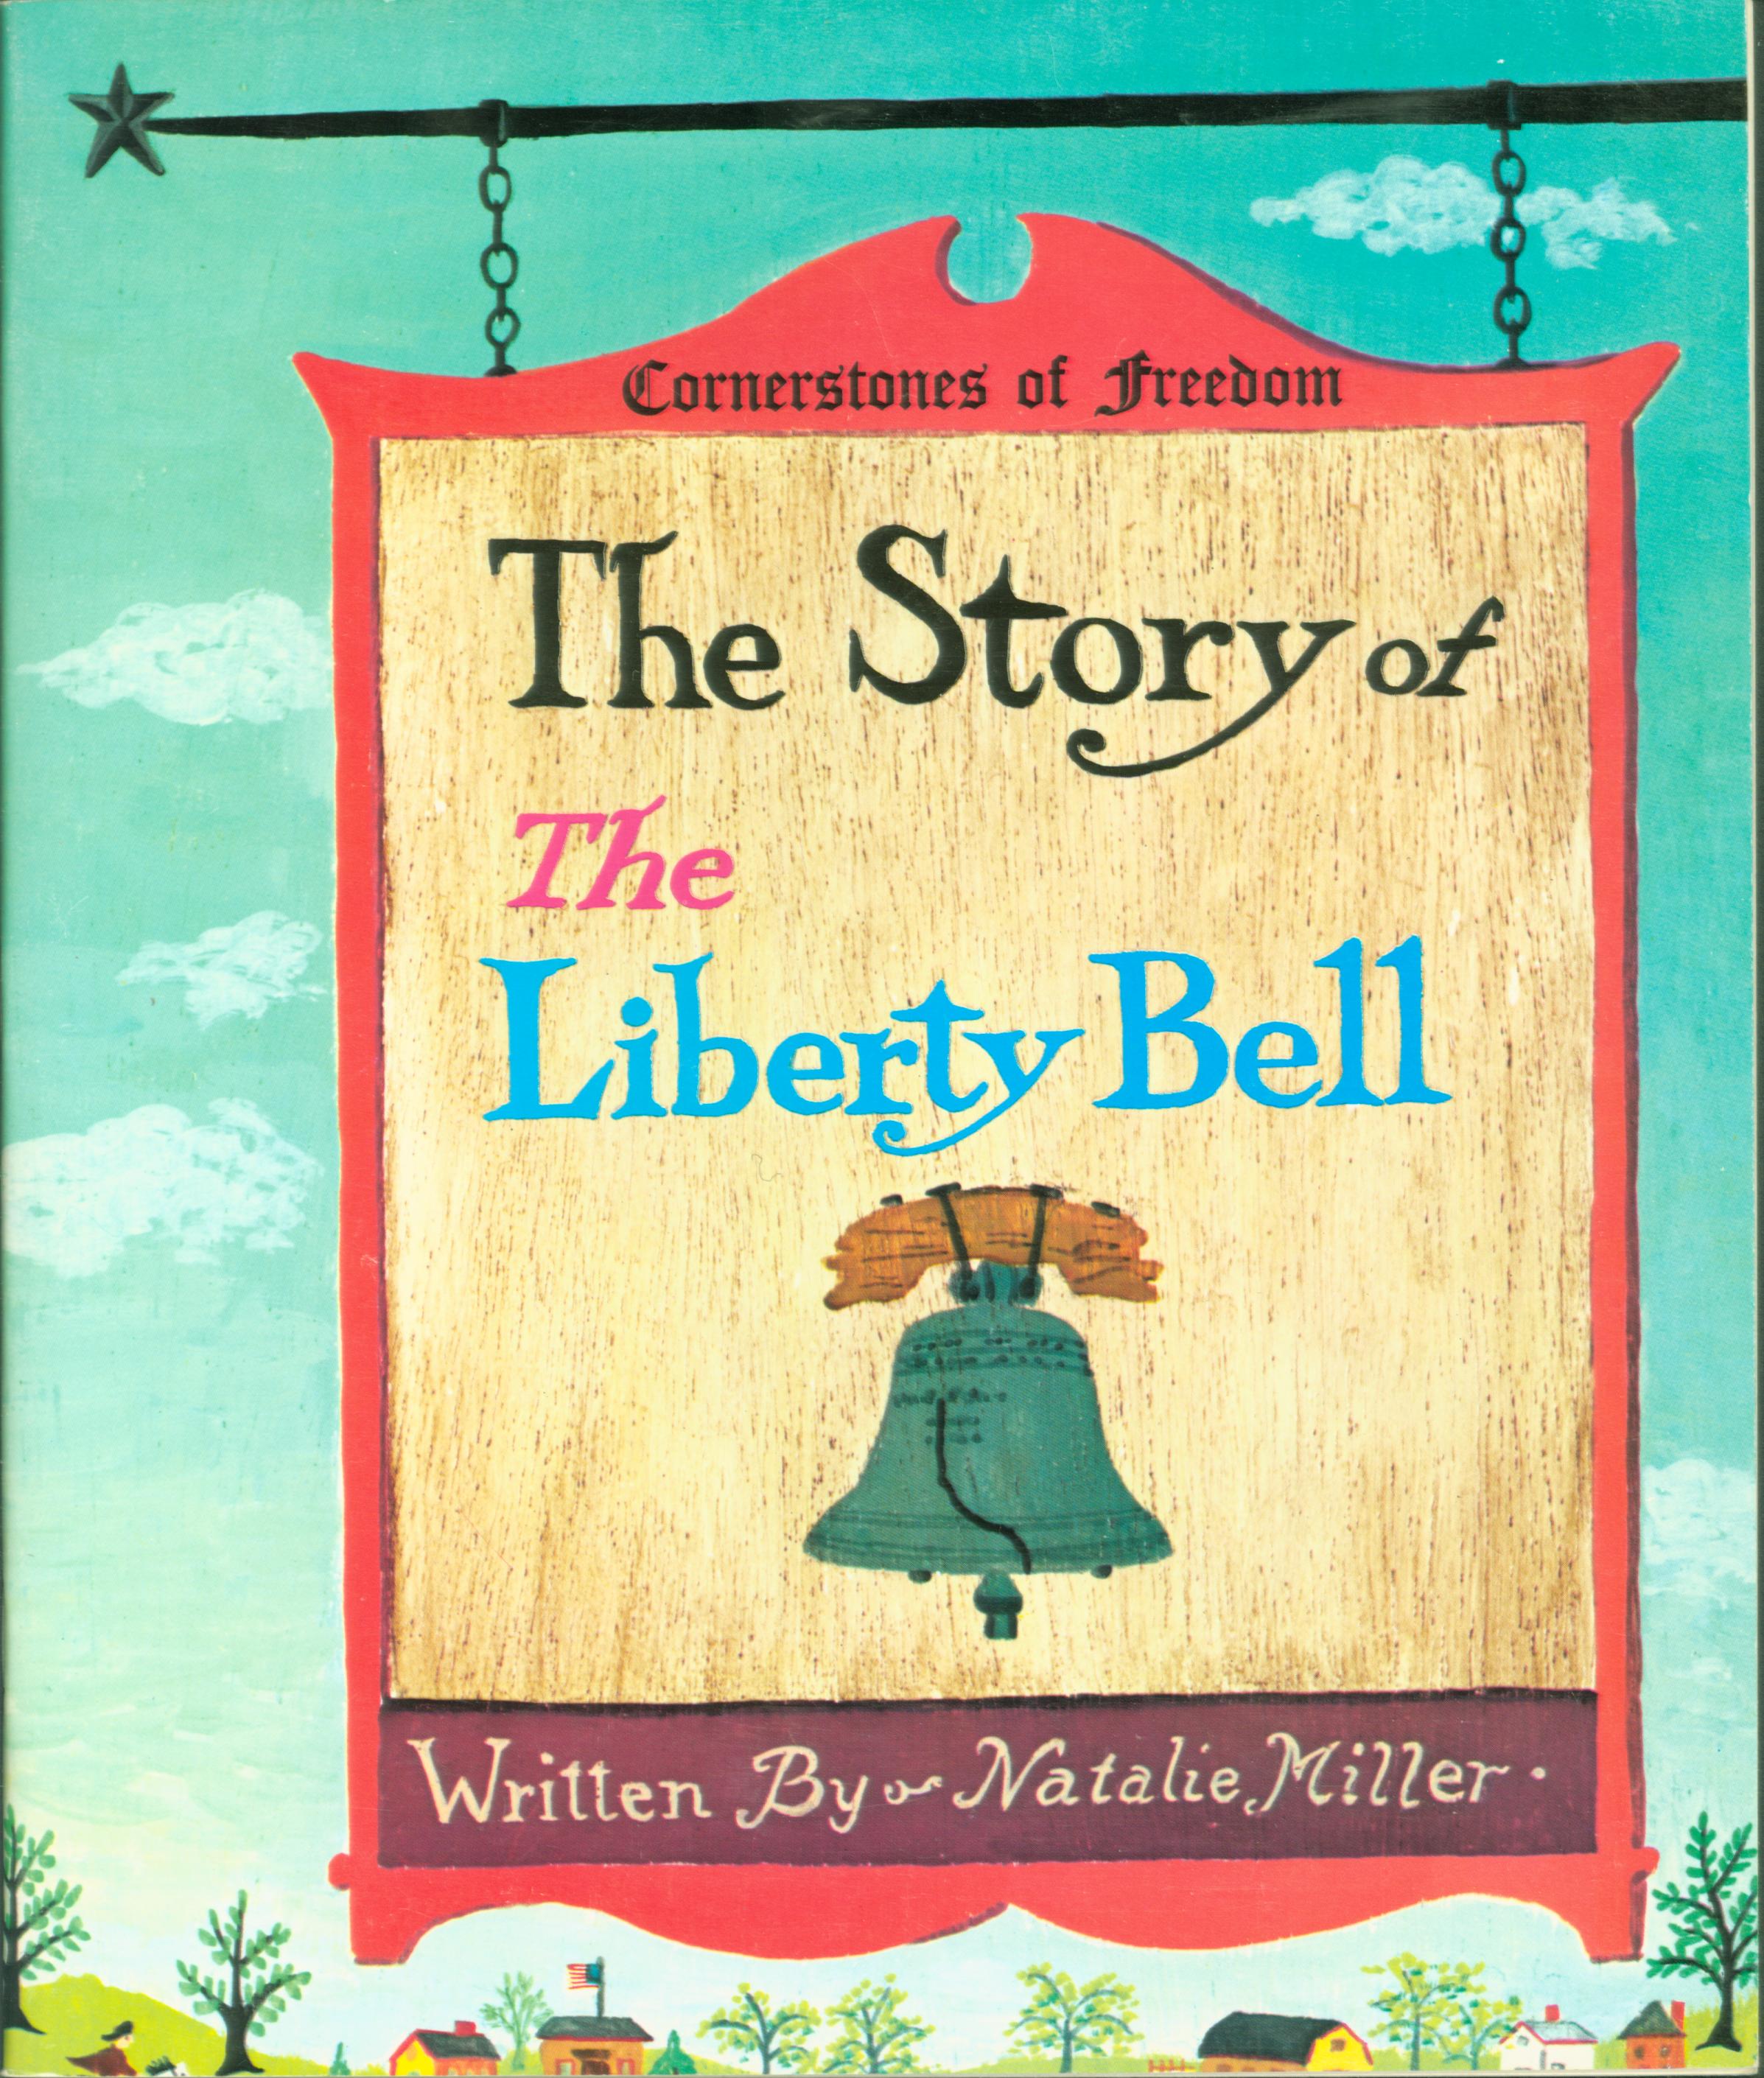 THE STORY OF THE LIBERTY BELL.